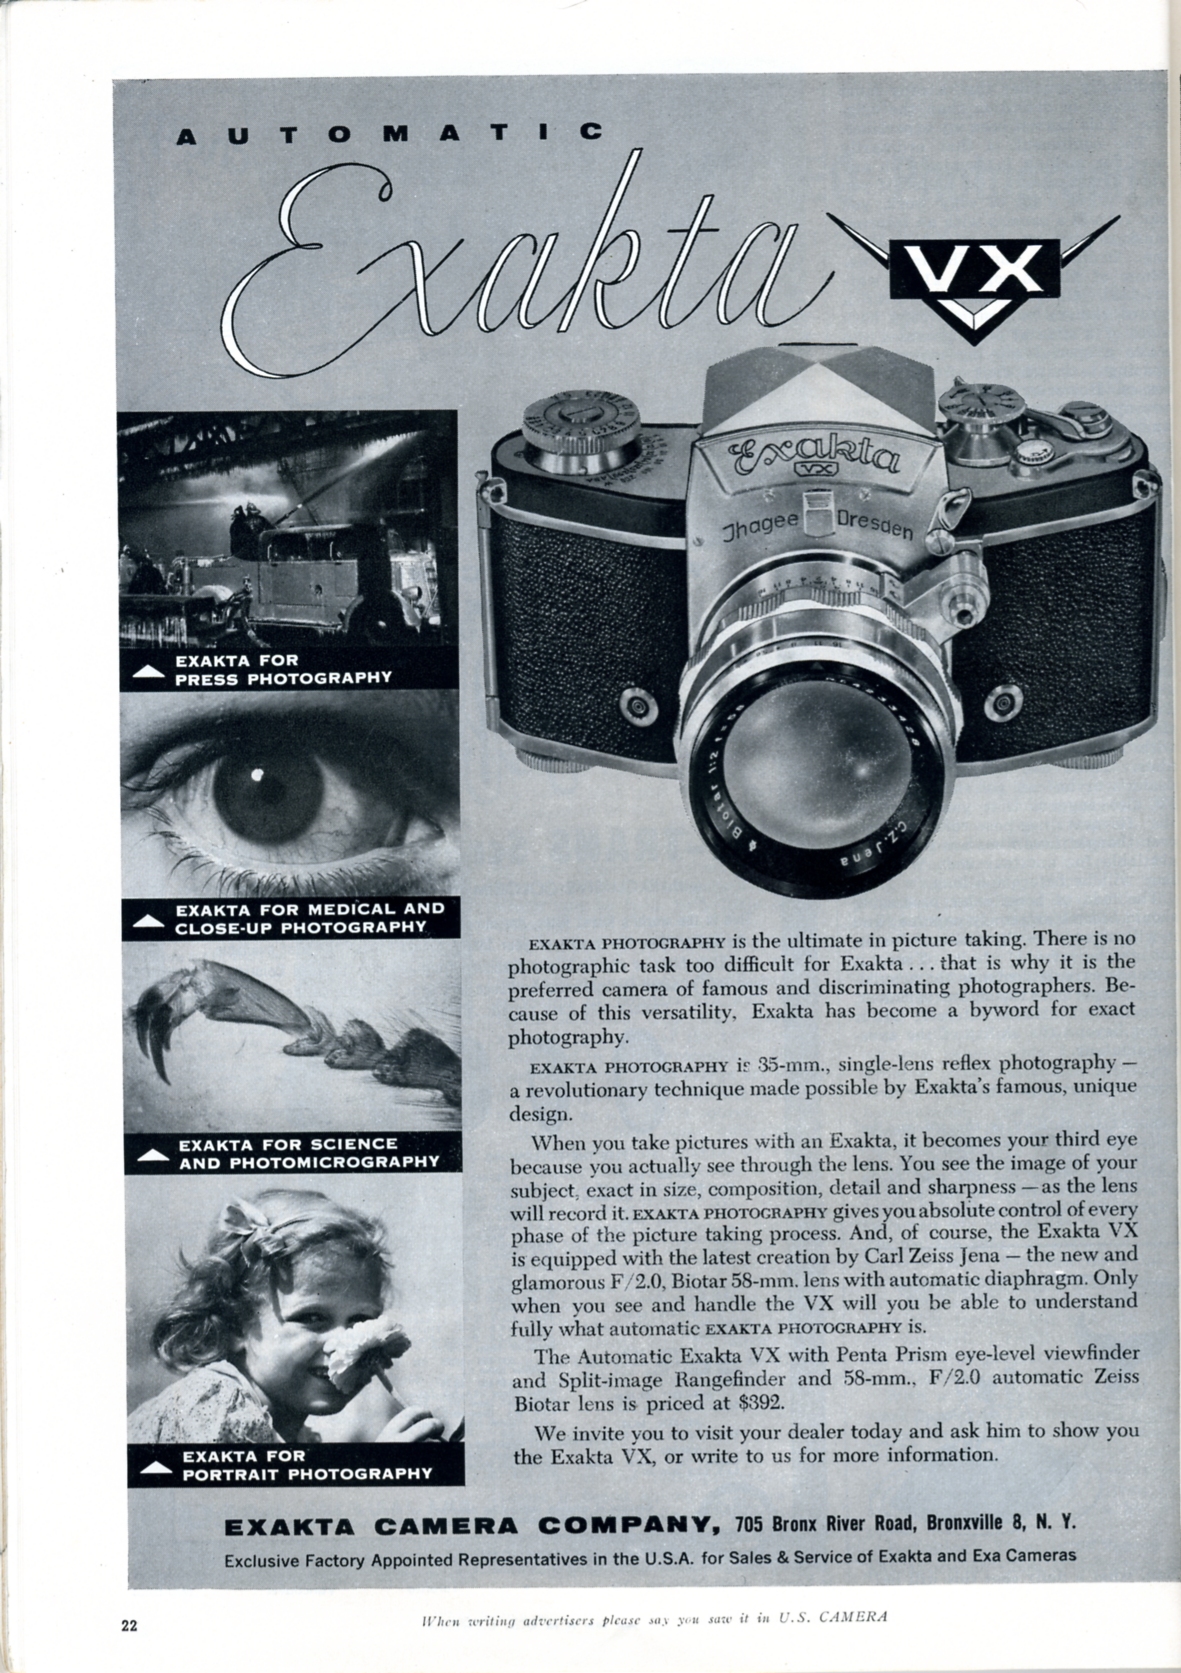 an old advertit showing a camera and its pictures